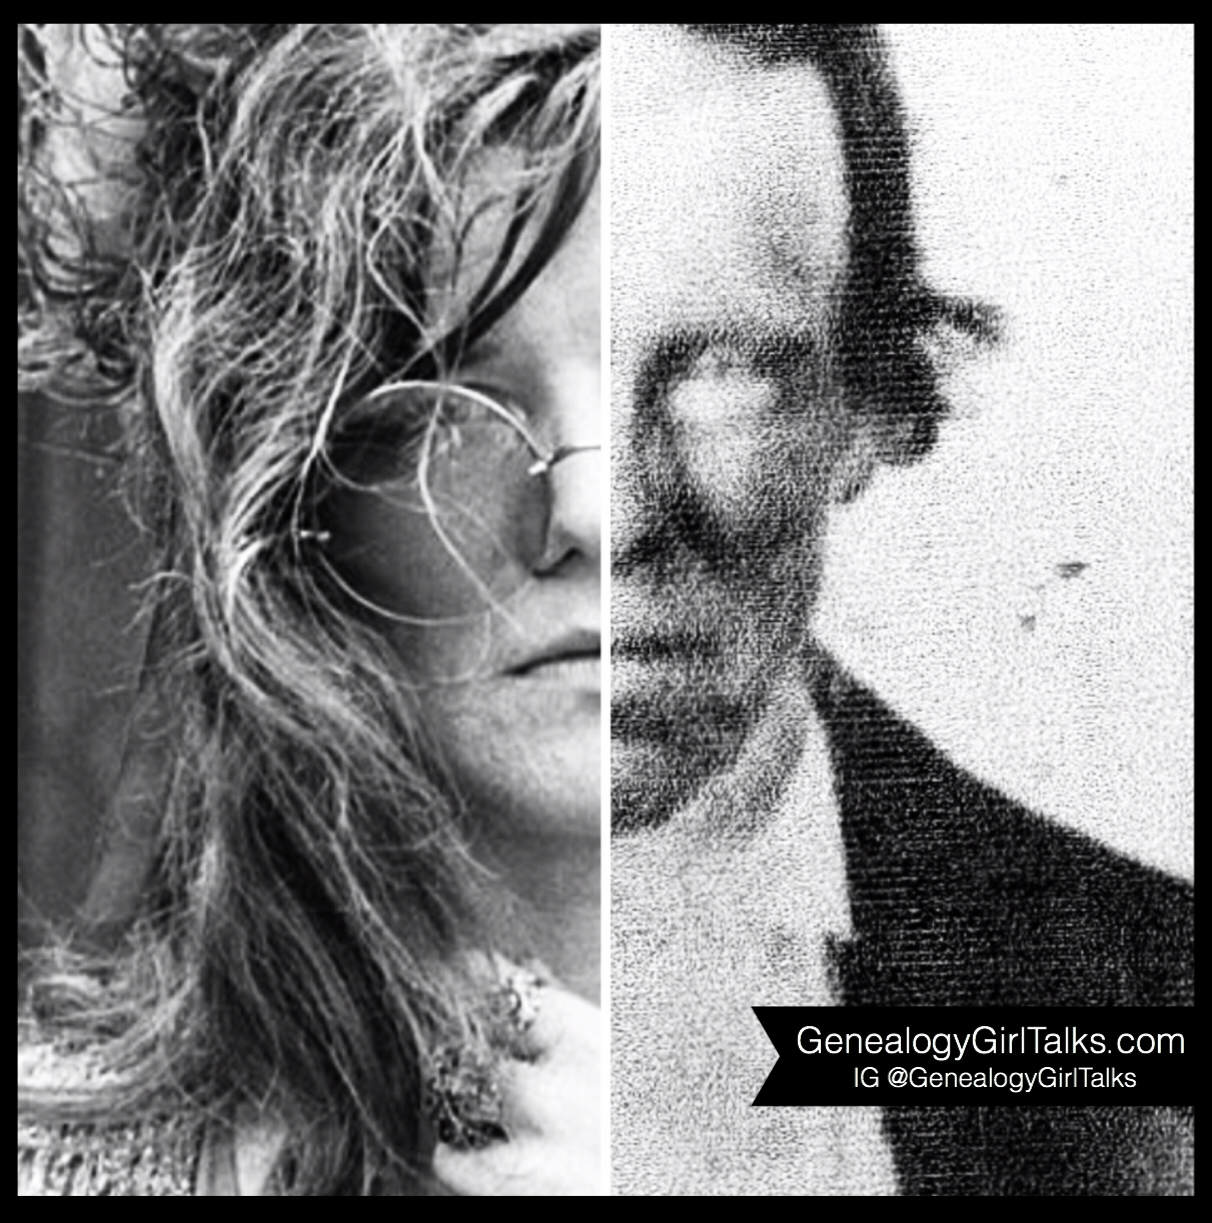 Janis Joplin & her 2nd great grandfather. Read more about Janis’ Genealogy & Family History!